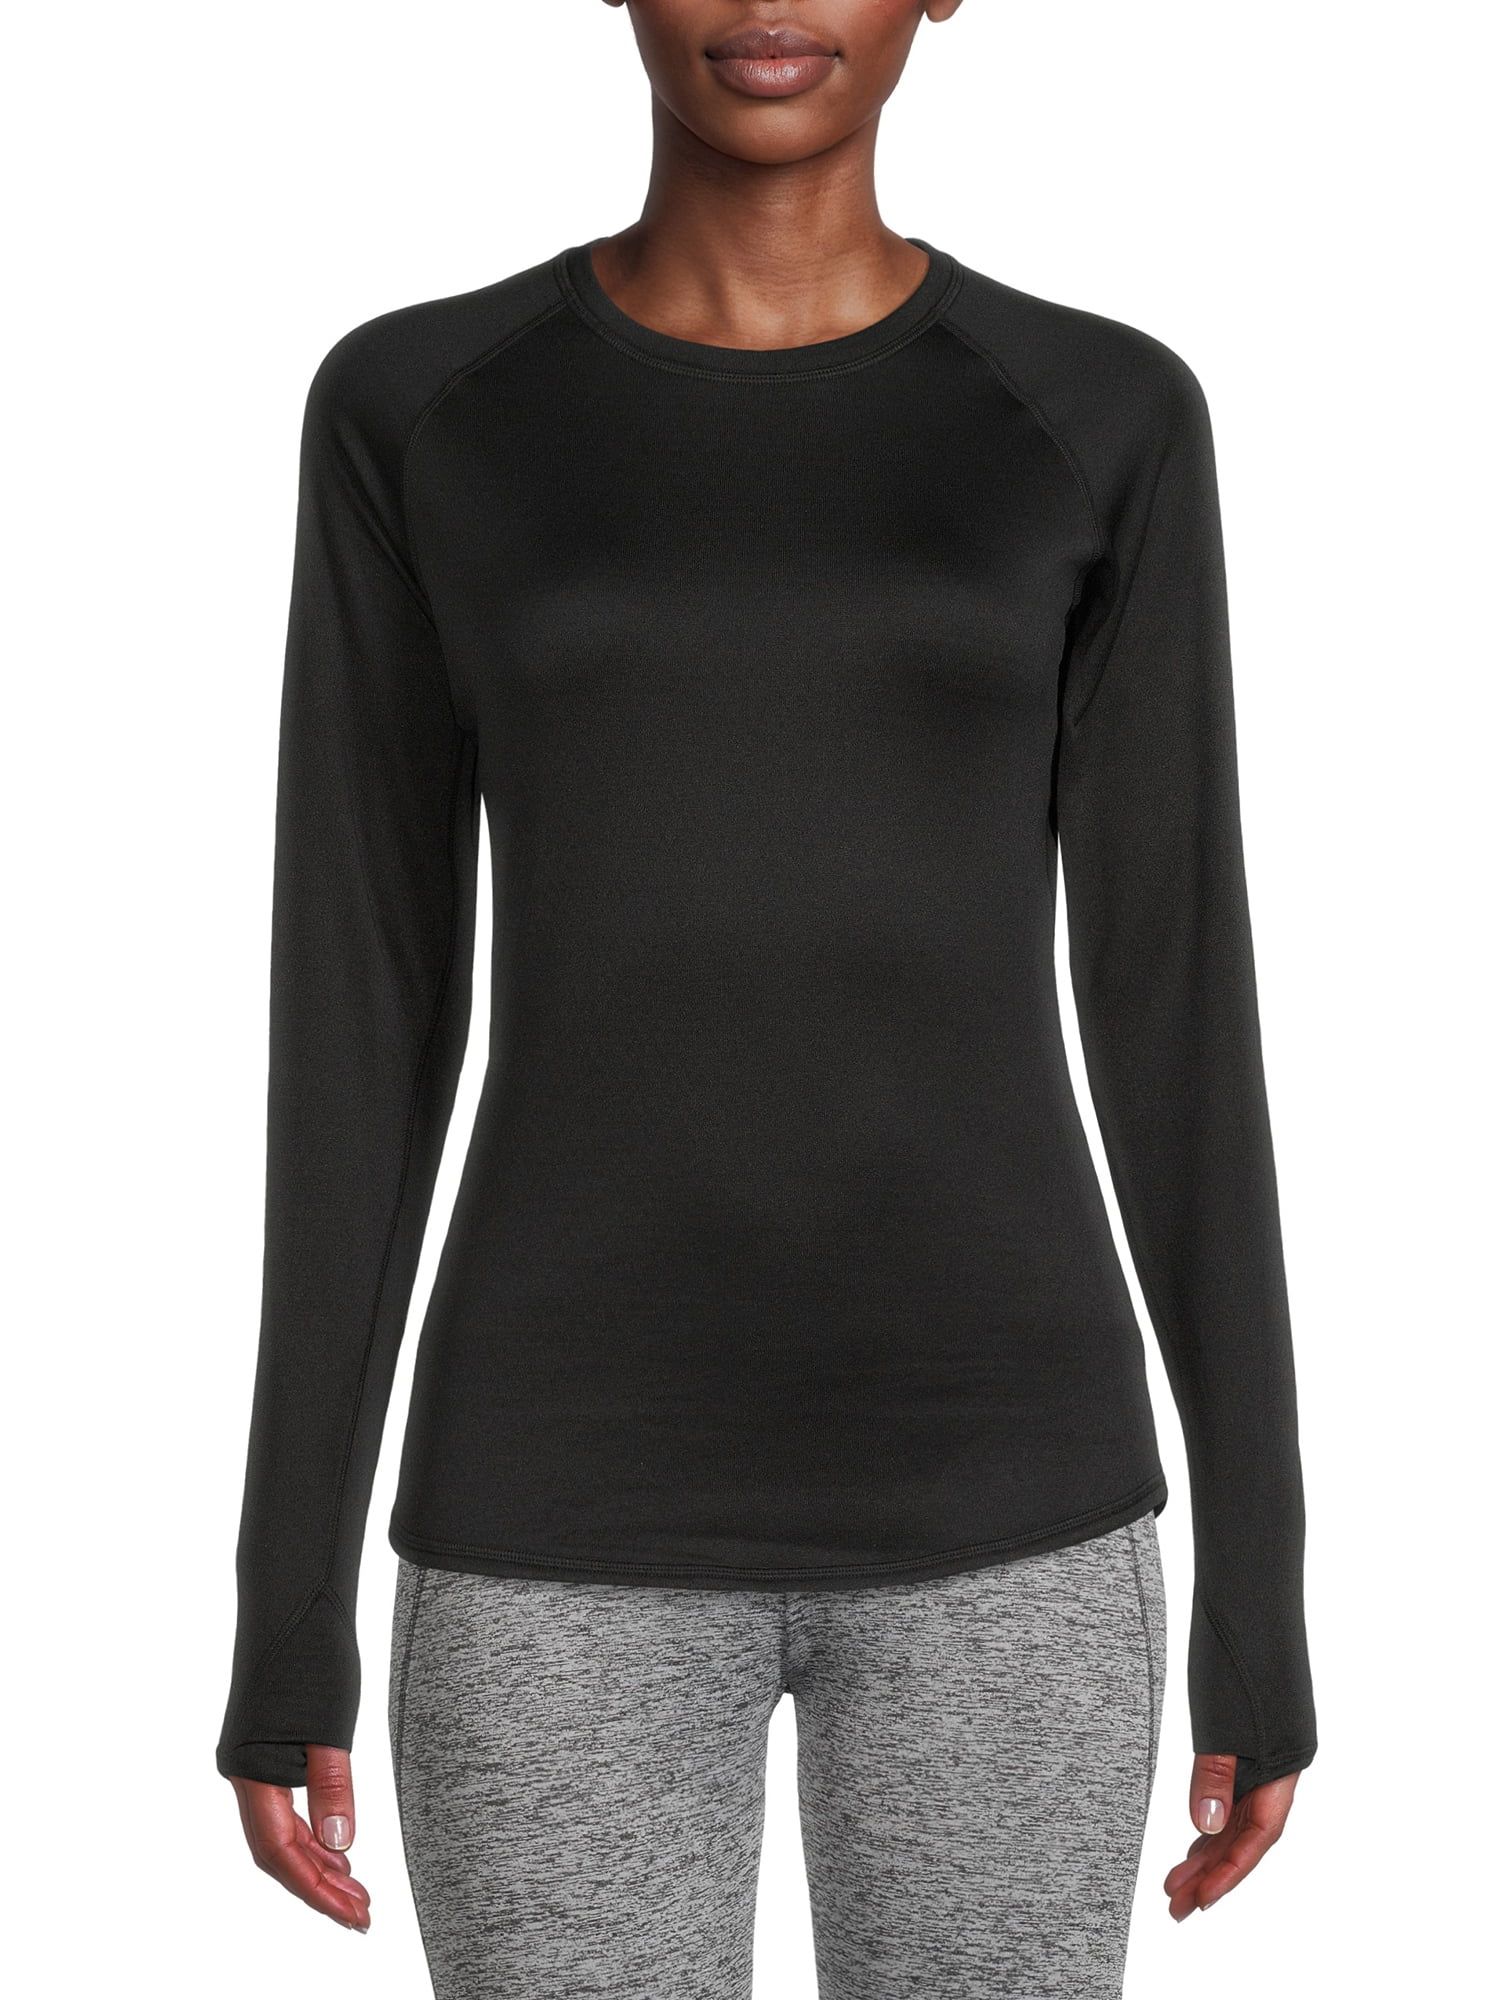 ClimateRight by Cuddl Duds Women's Grid Warmth Long Underwear Crewneck Thermal Top | Walmart (US)